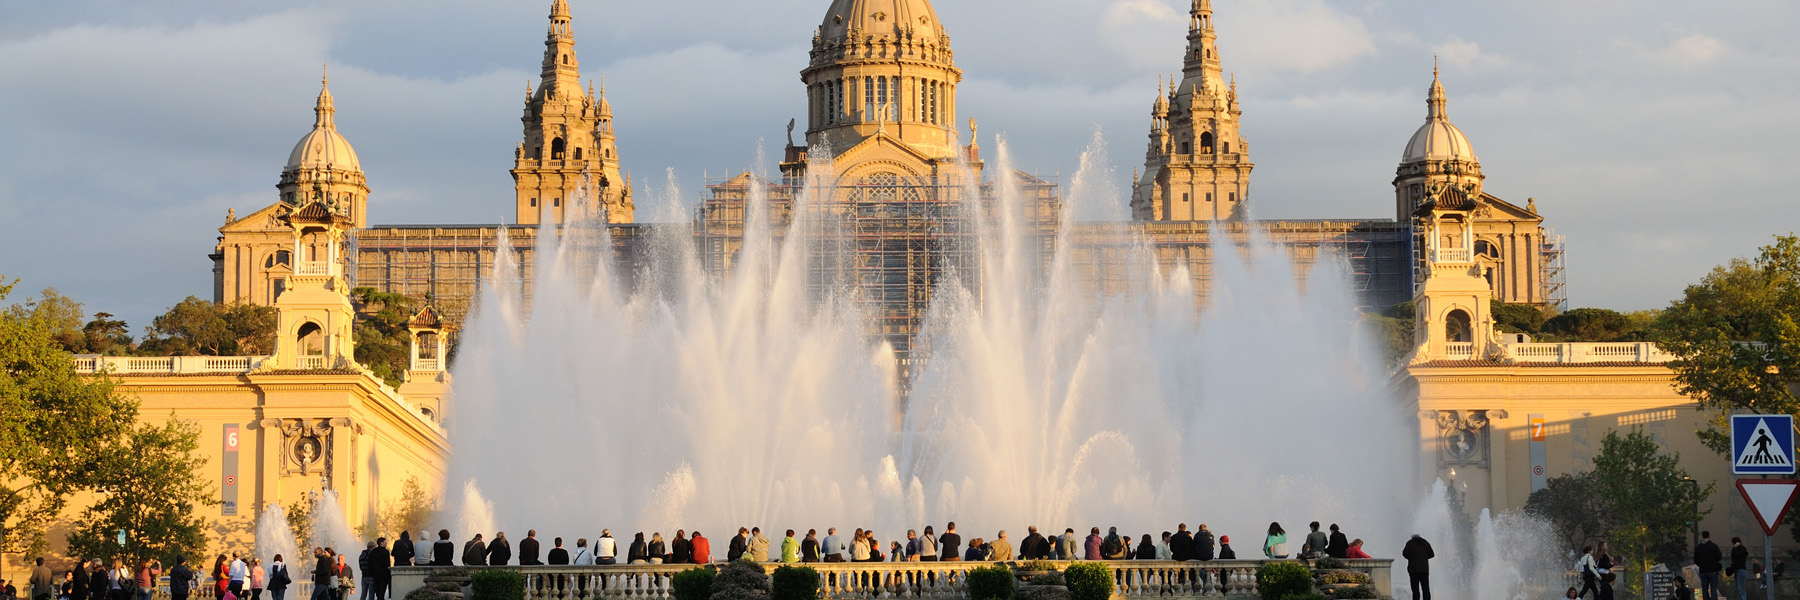 Large, ornate building with a fountain in front in Barcelona 